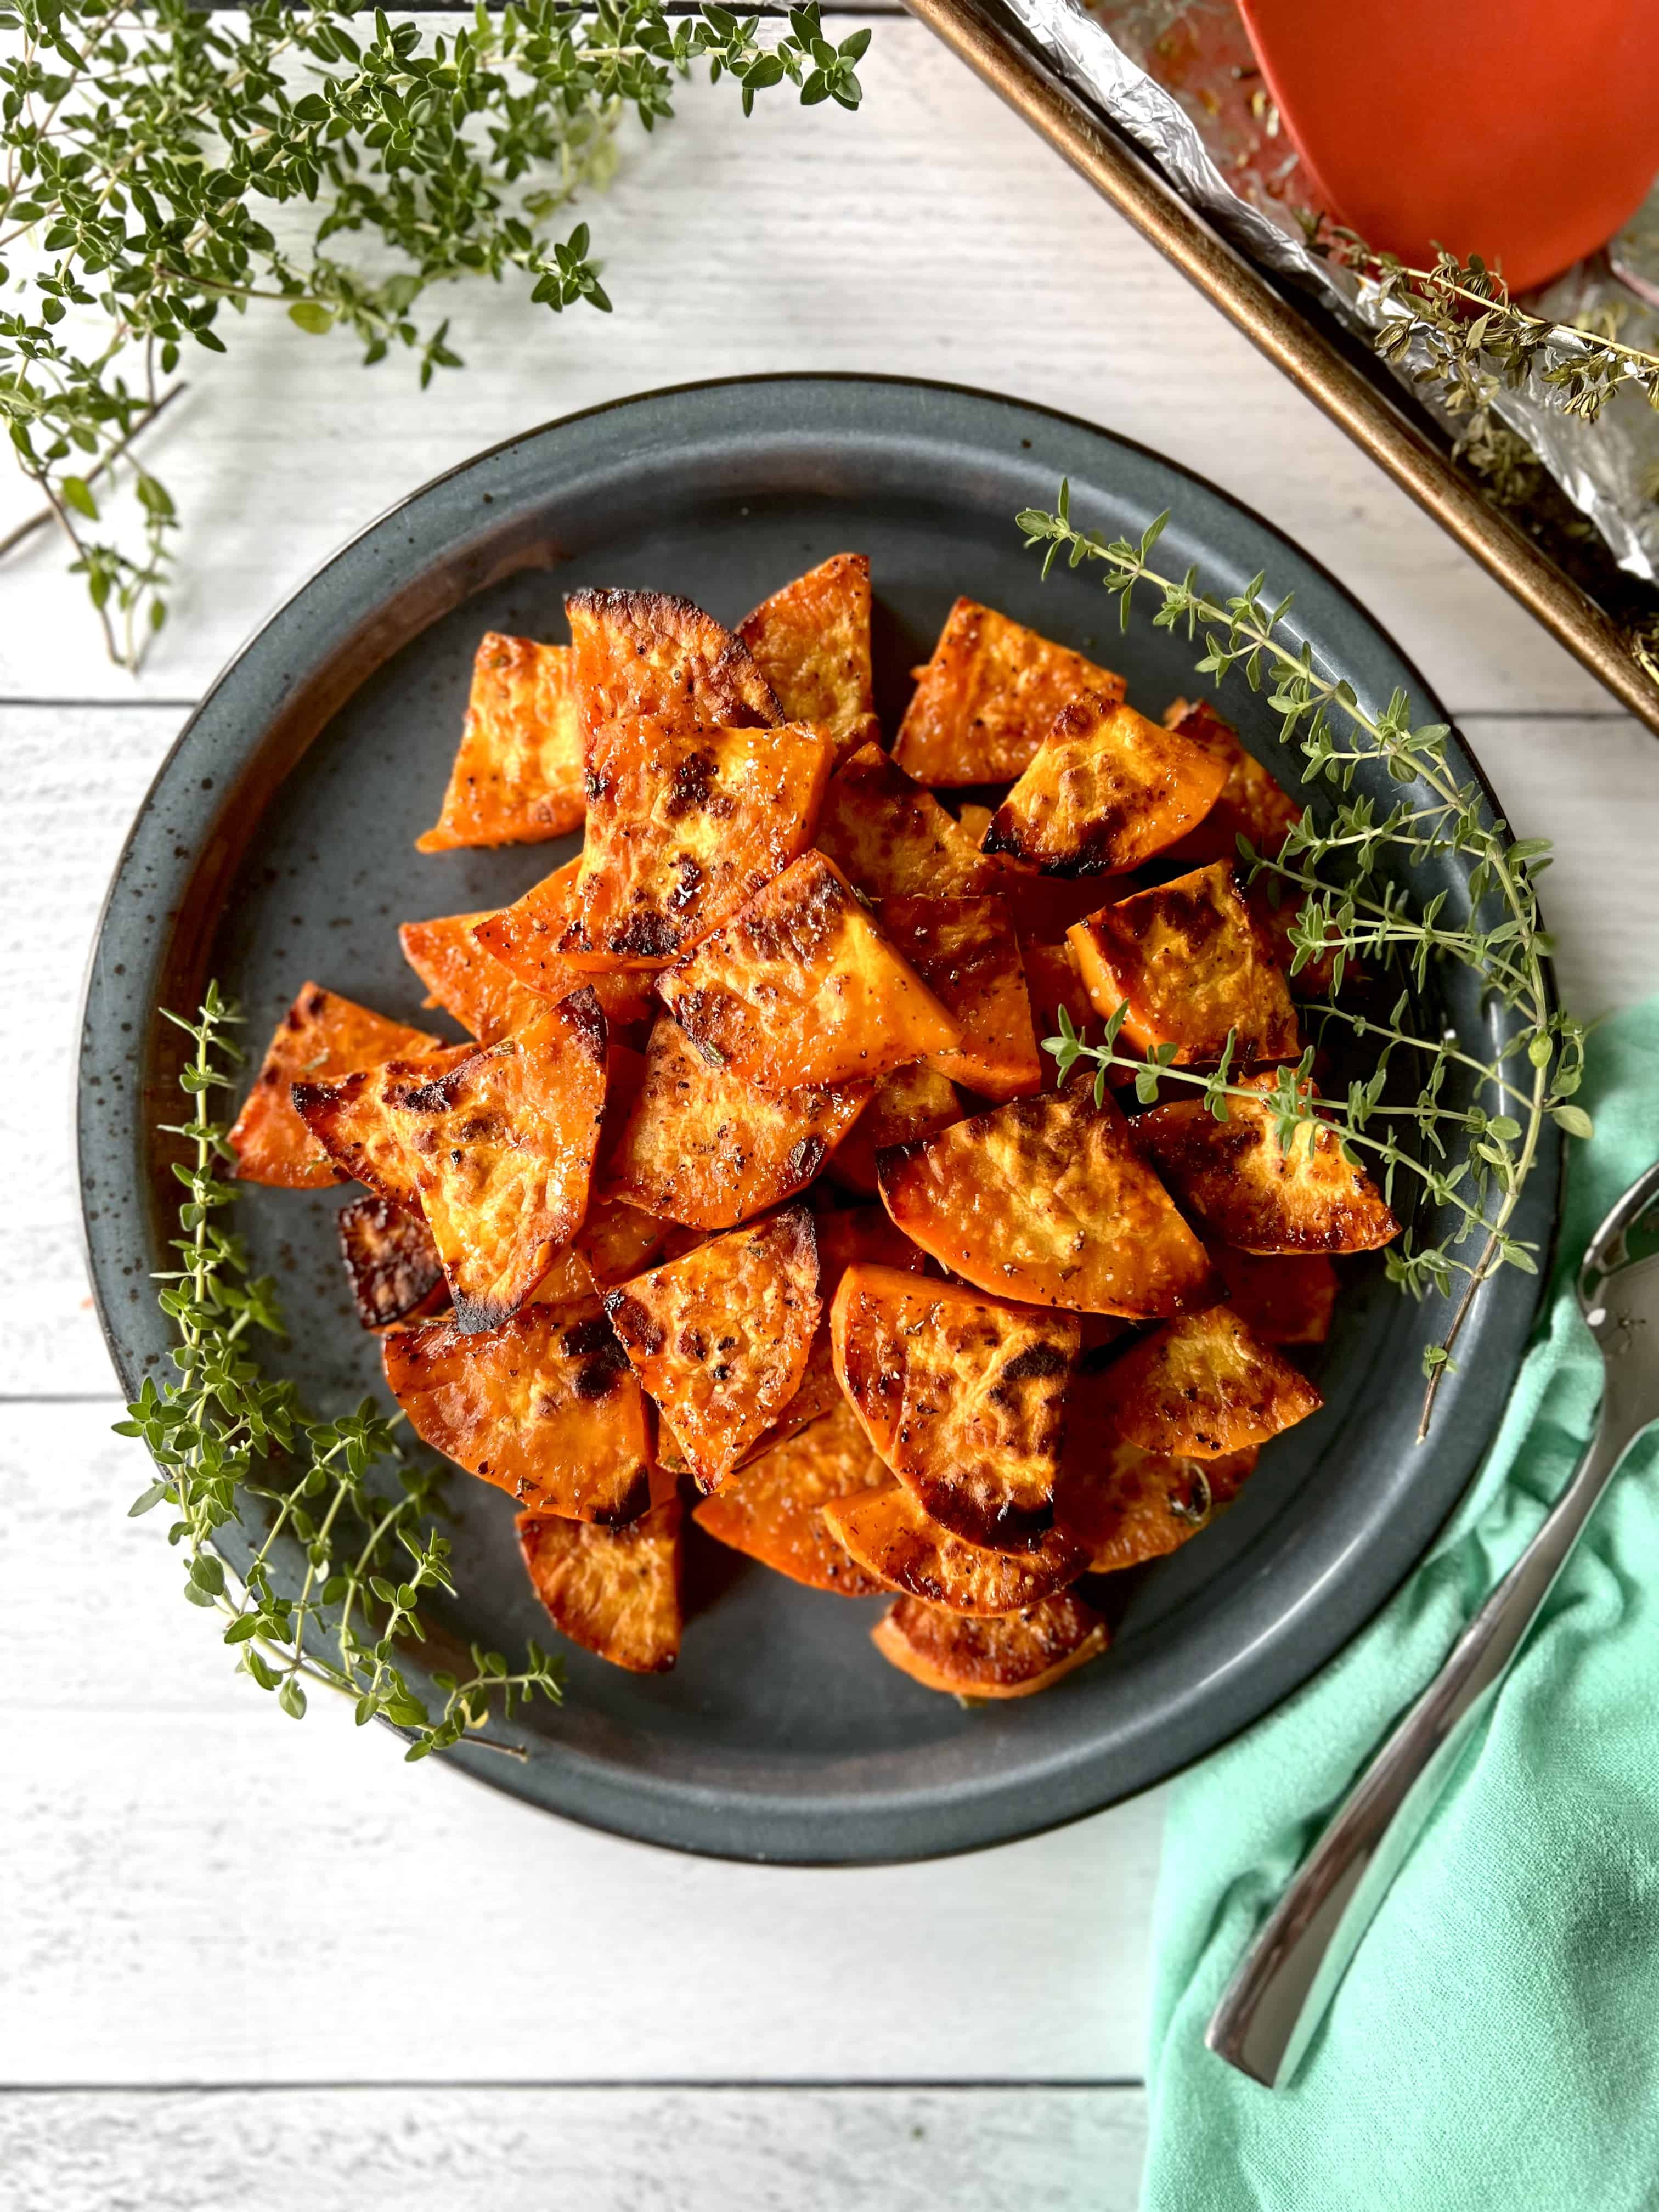 Slices of caramelized sweet potatoes piled on a blue plate with thyme sprigs.